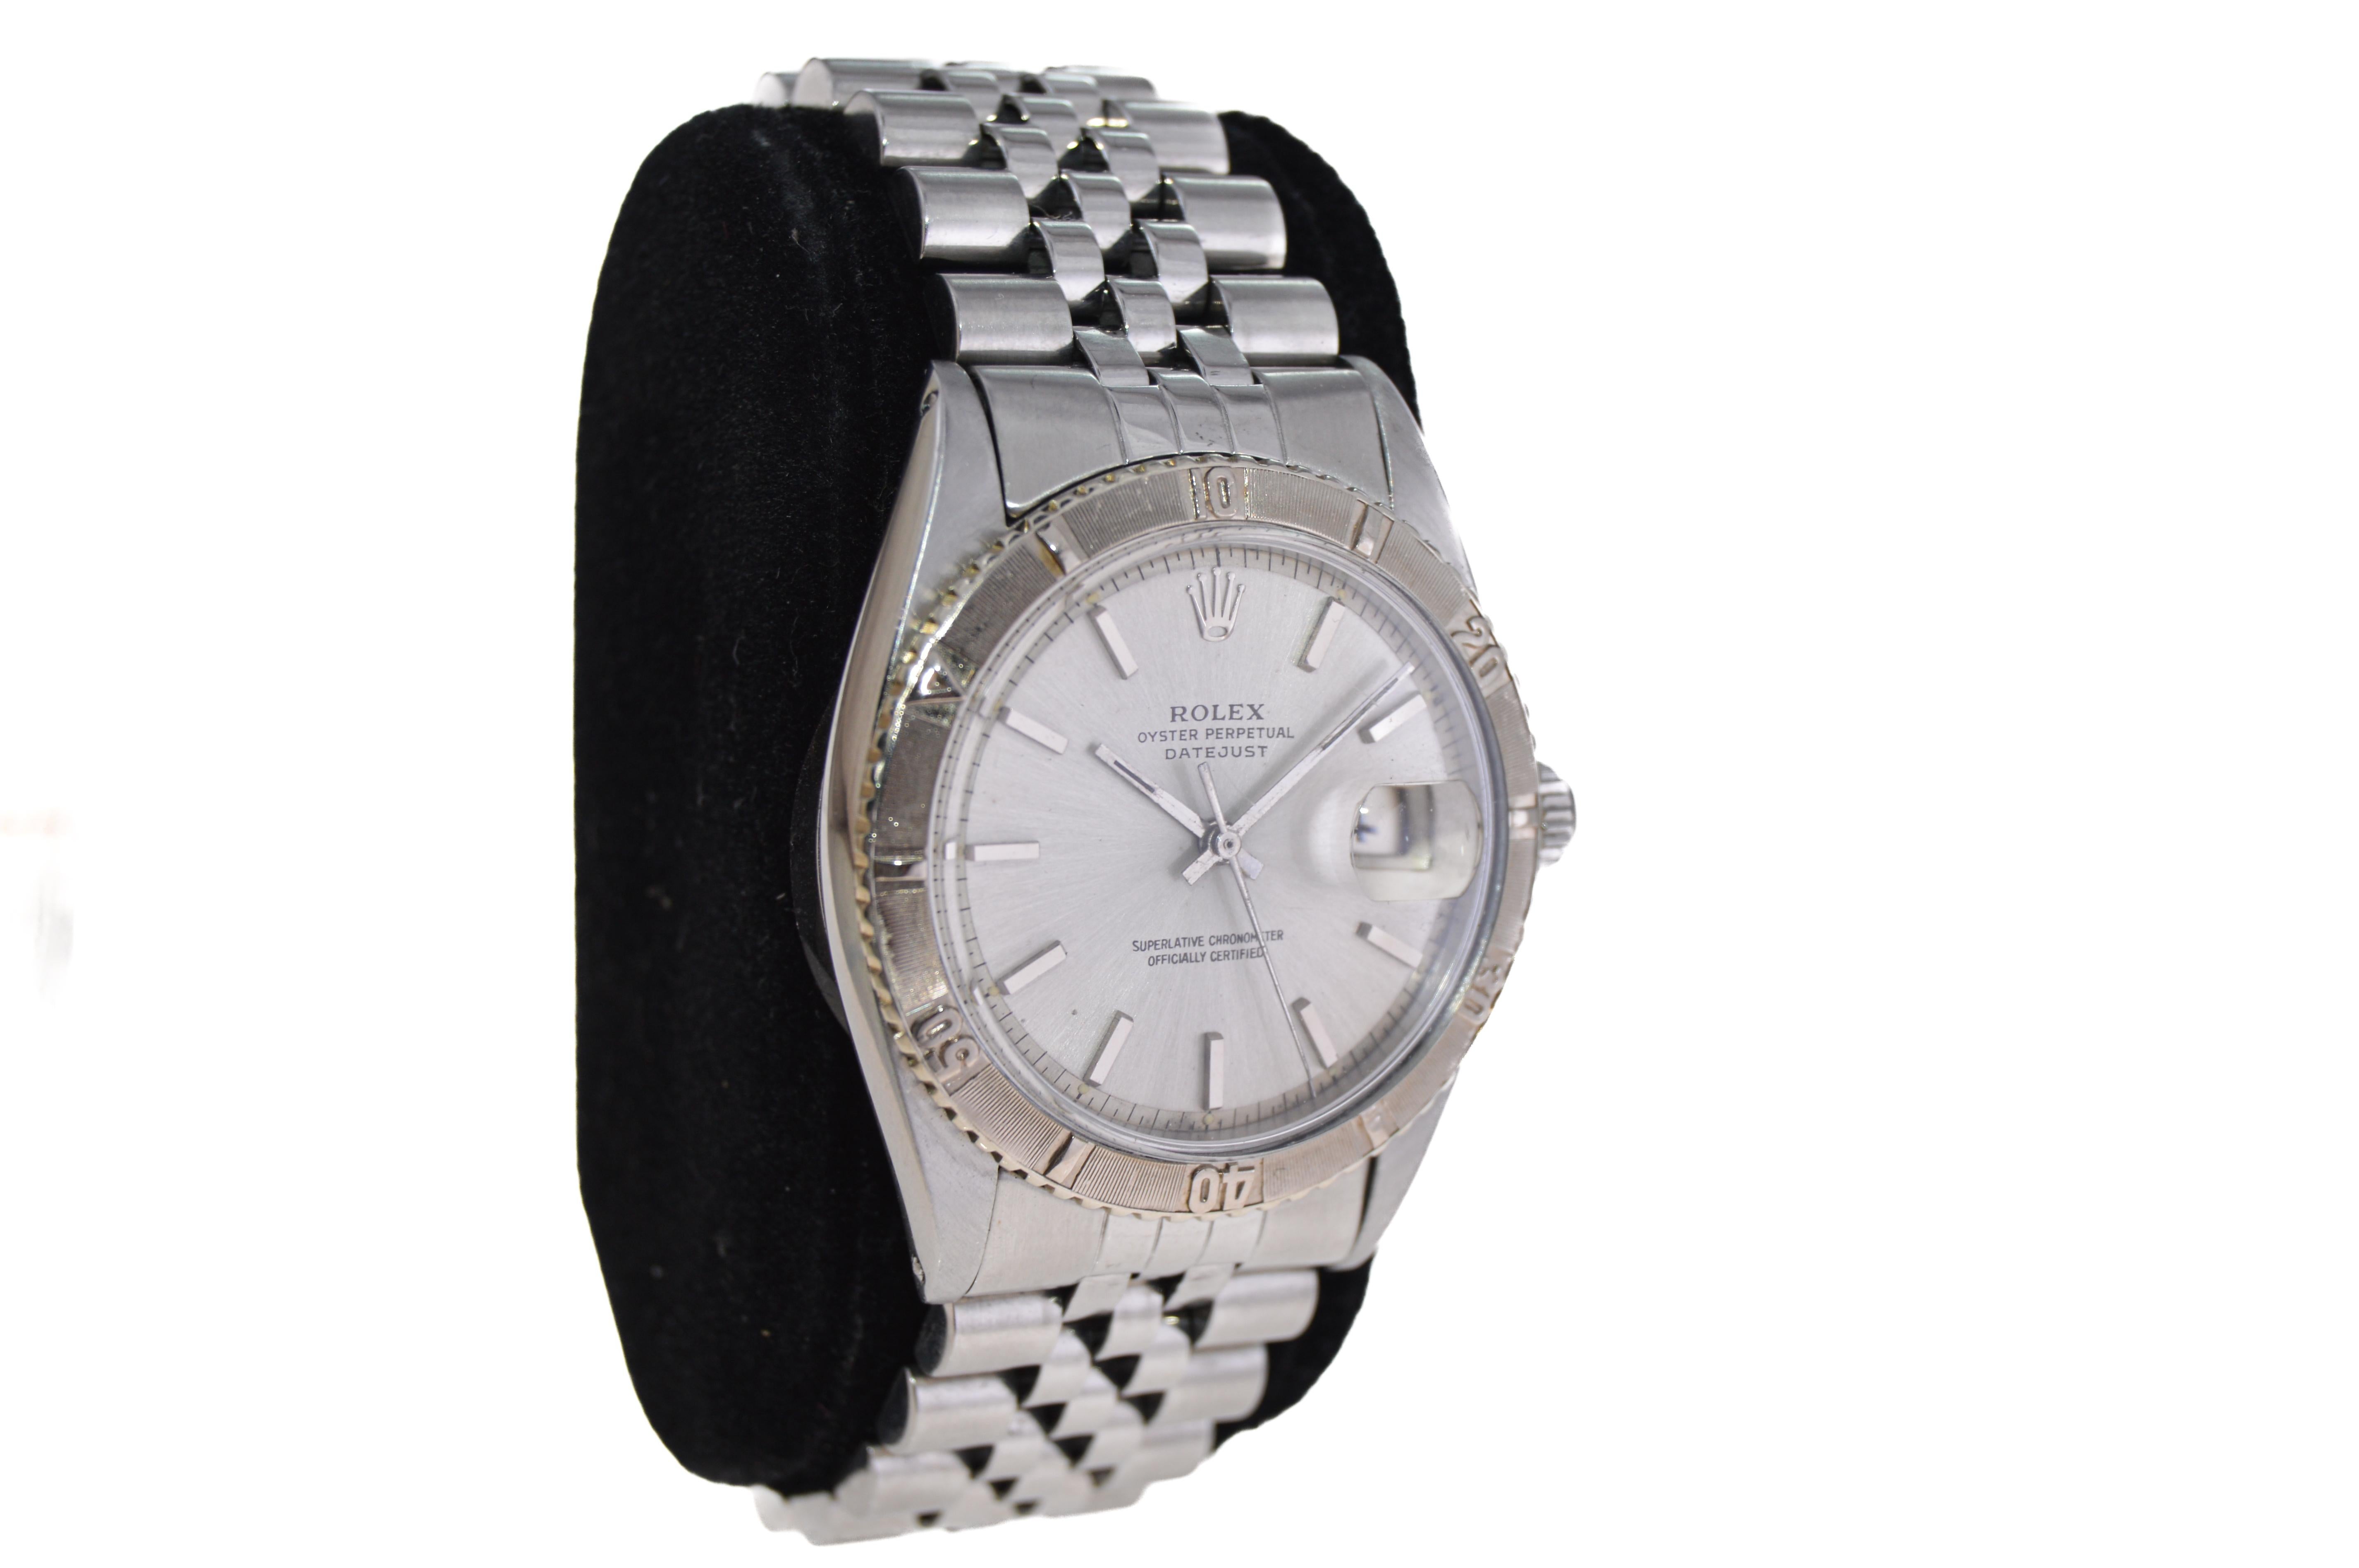 FACTORY / HOUSE: Rolex Watch Company
STYLE / REFERENCE: Oyster Perpetual / Thunderbird Bezel / Reference 1625
METAL / MATERIAL: Stainless Steel / 14Kt. White Gold Bezel
DIMENSIONS:  Length 42mm X Diameter 34mm
CIRCA: Mid 1960's
MOVEMENT / CALIBER: 